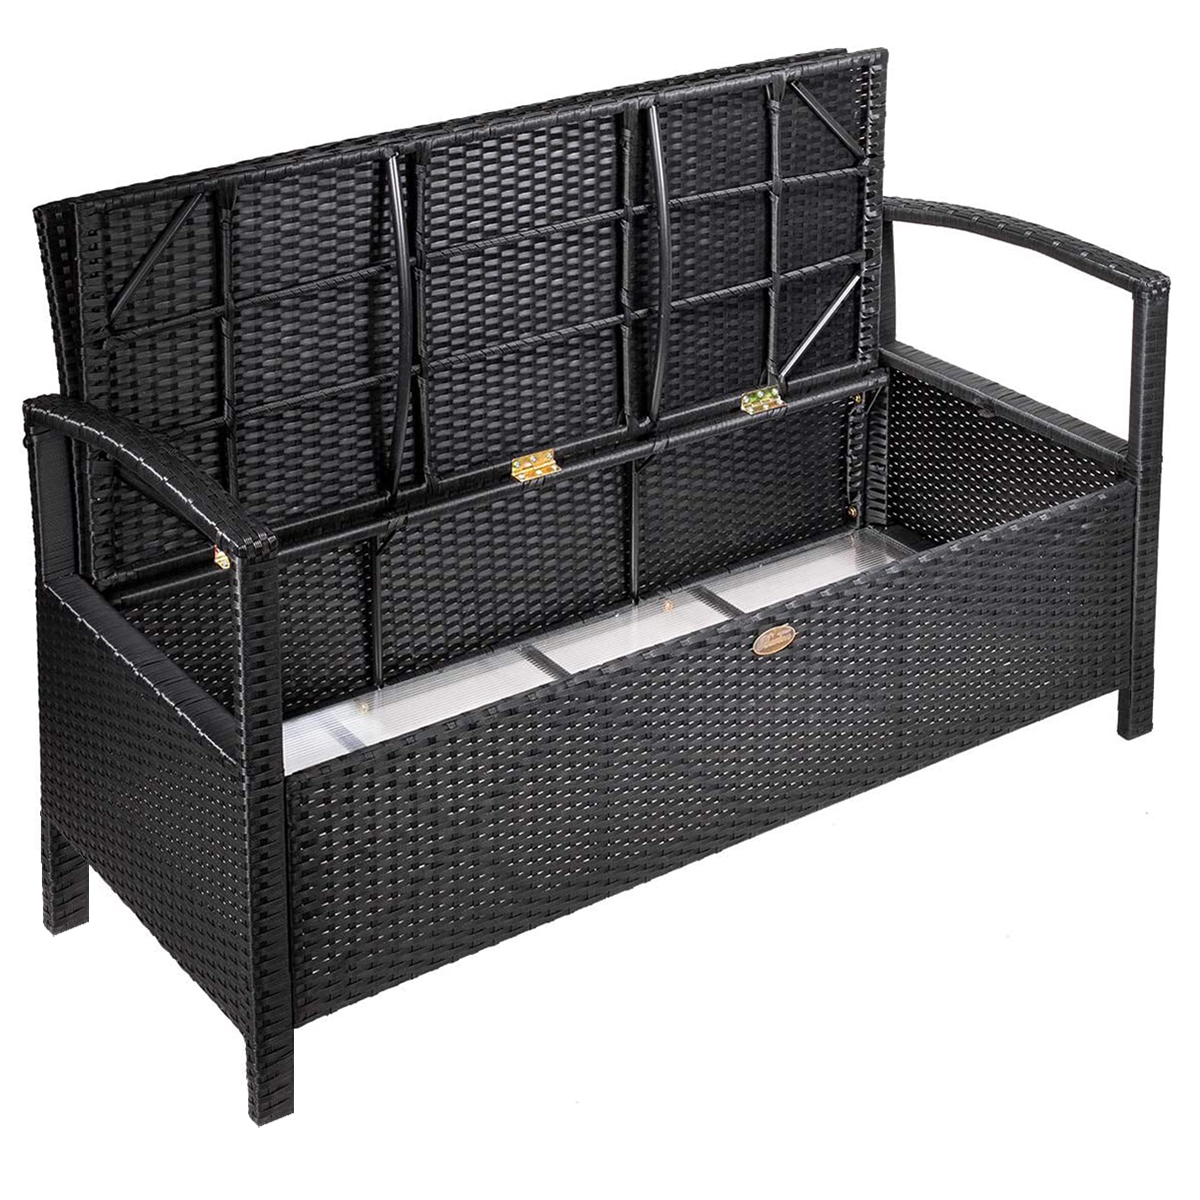 Barton Outdoor All-Weather Storage Bench Thick Seat Cushion w/ Backrest Patio Deck Box Wicker - image 4 of 7